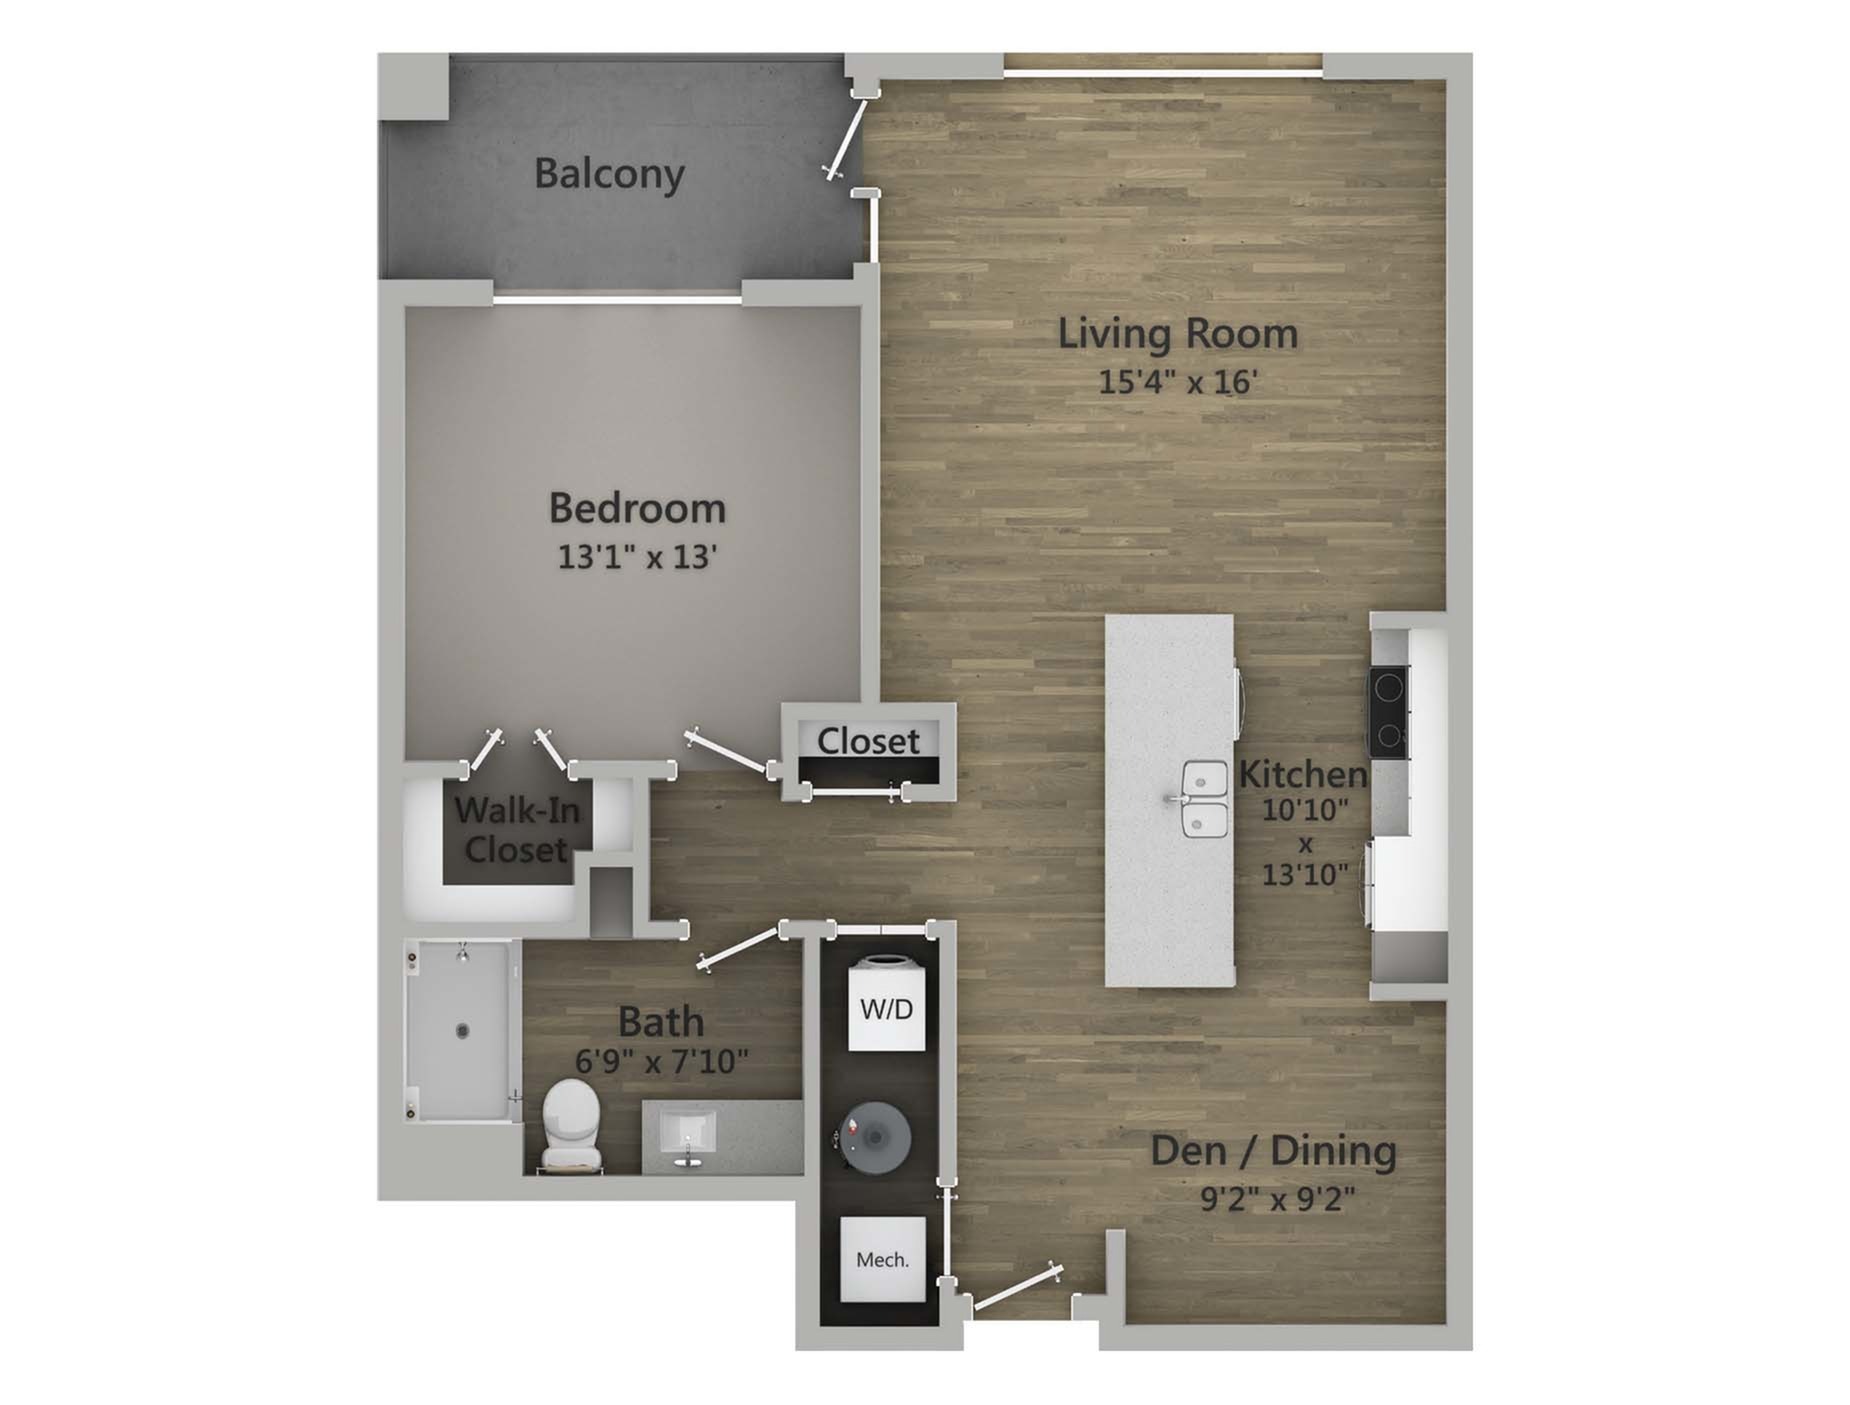 Floor Plan 1I | State Street Station | Apartments in Wauwatosa, WI